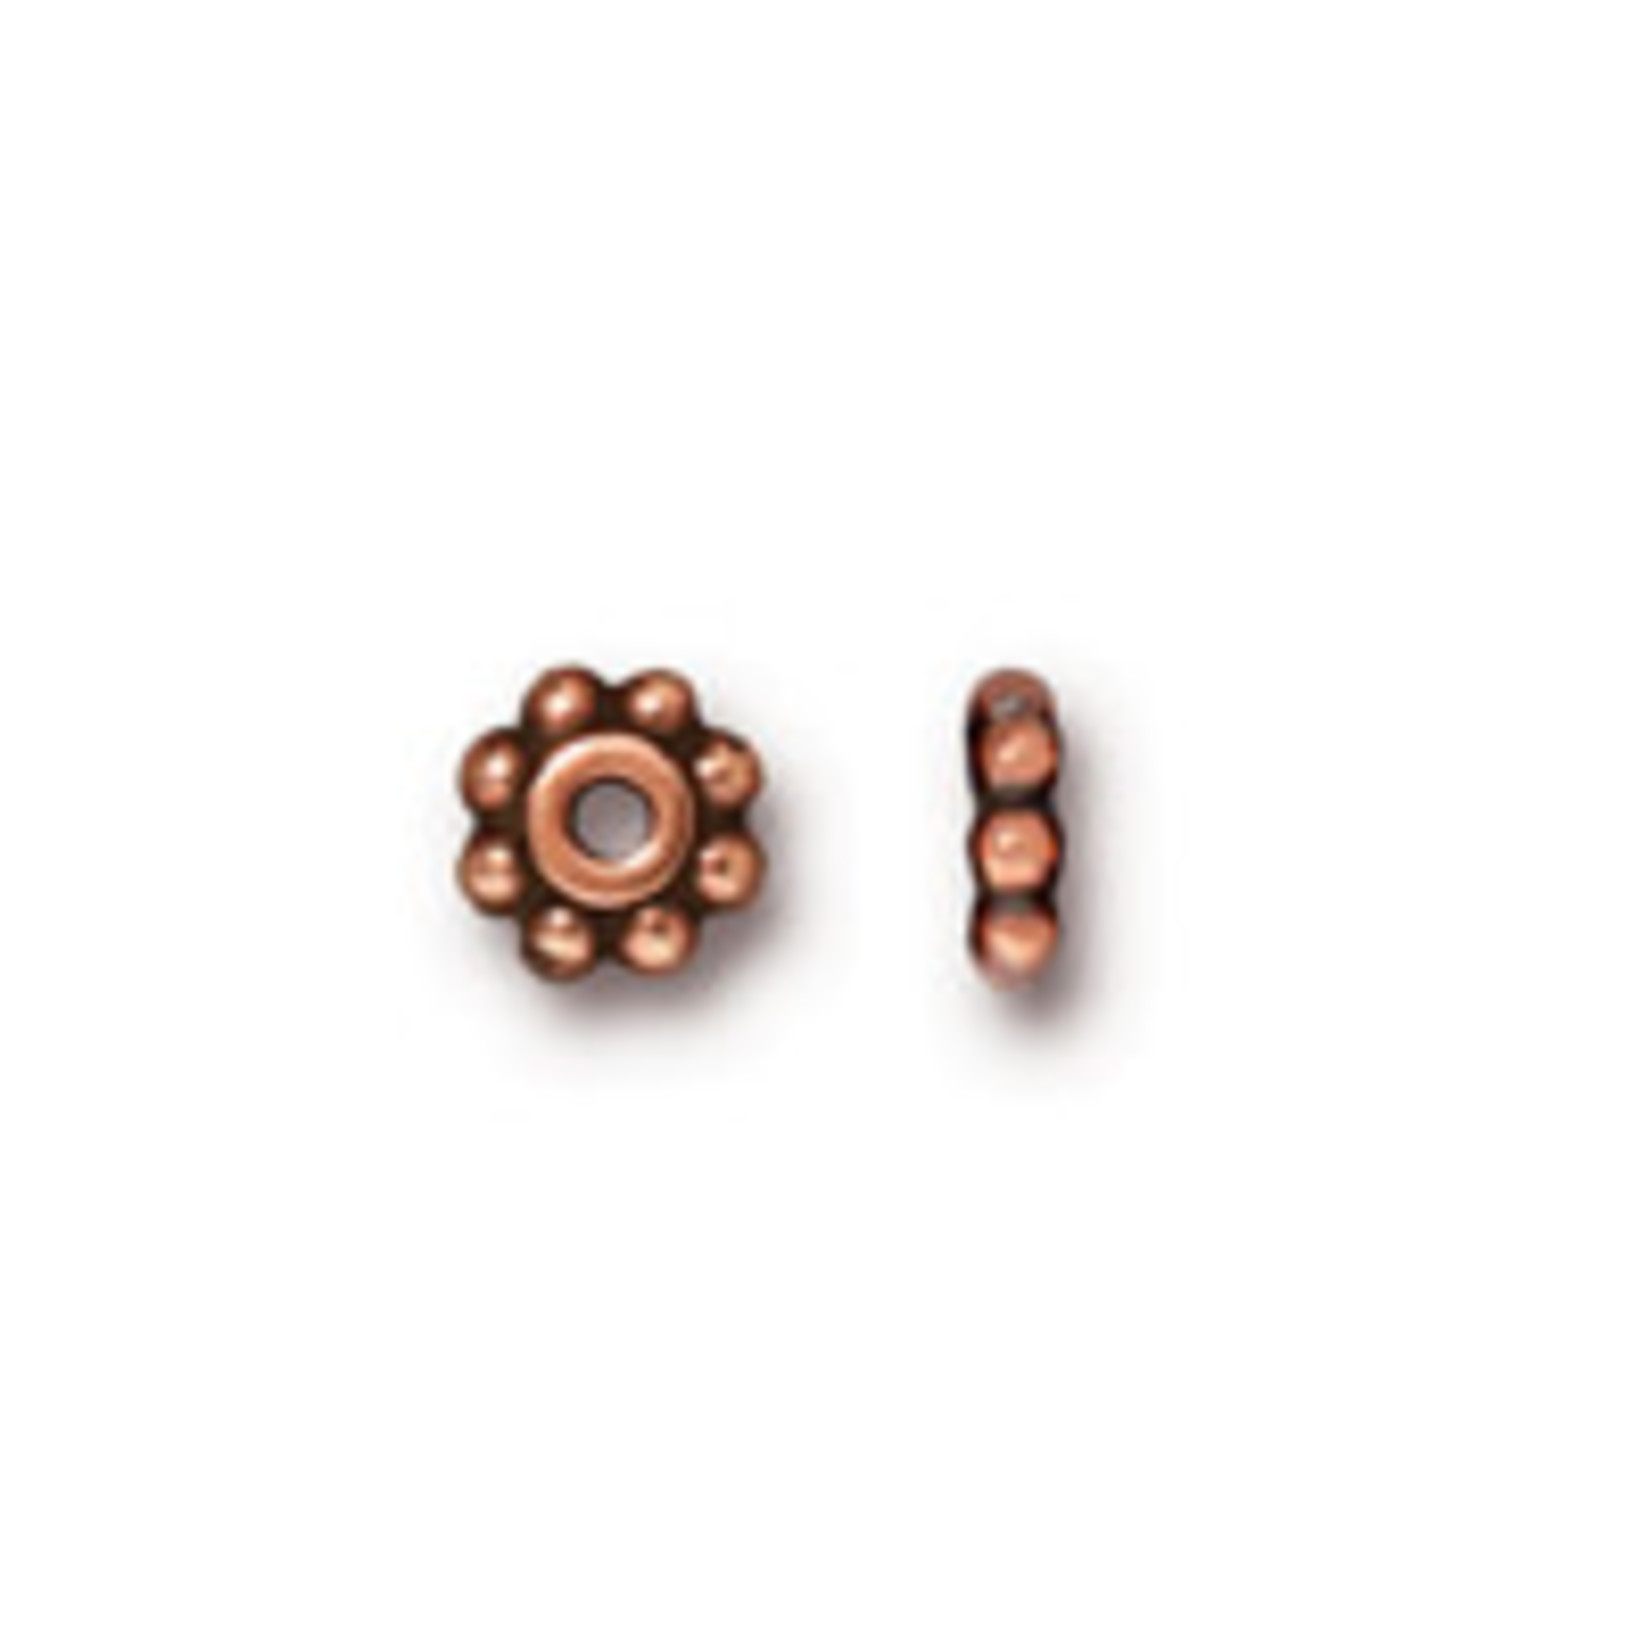 Tierracast Antique Copper Plated 6mm Beaded Daisy Spacer Bead - 50 pieces